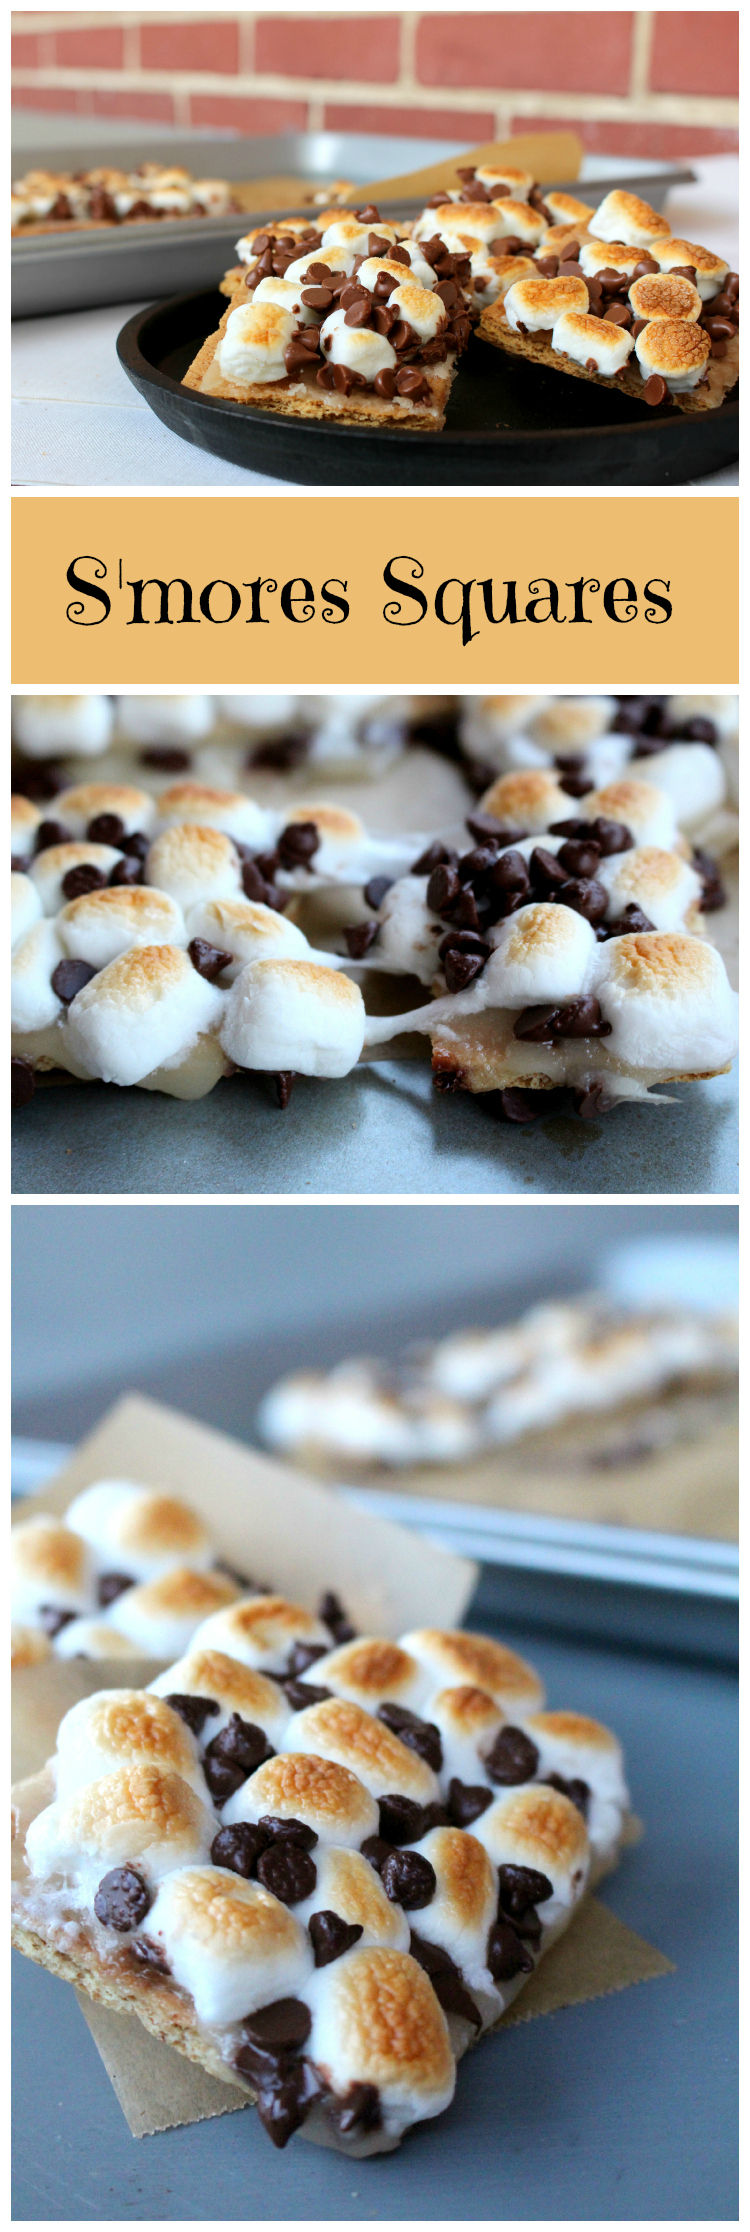 S'mores without the campfire! These 15 minutes s'mores squares feature all the chocolatey, gooey, toastiness of the classic campfire treat.